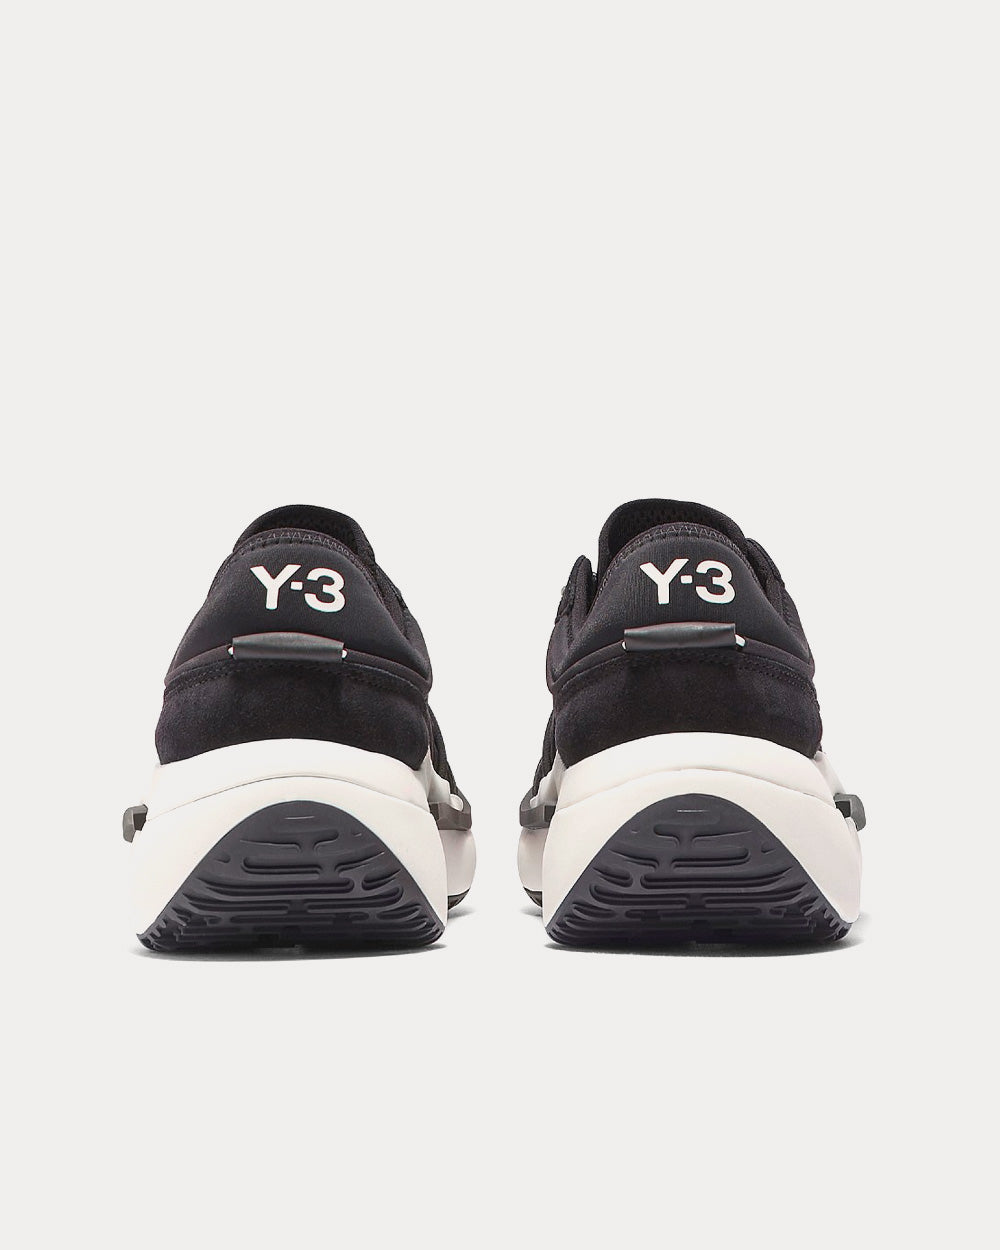 Y-3 - Classic Run Black / Core White Low Top Sneakers